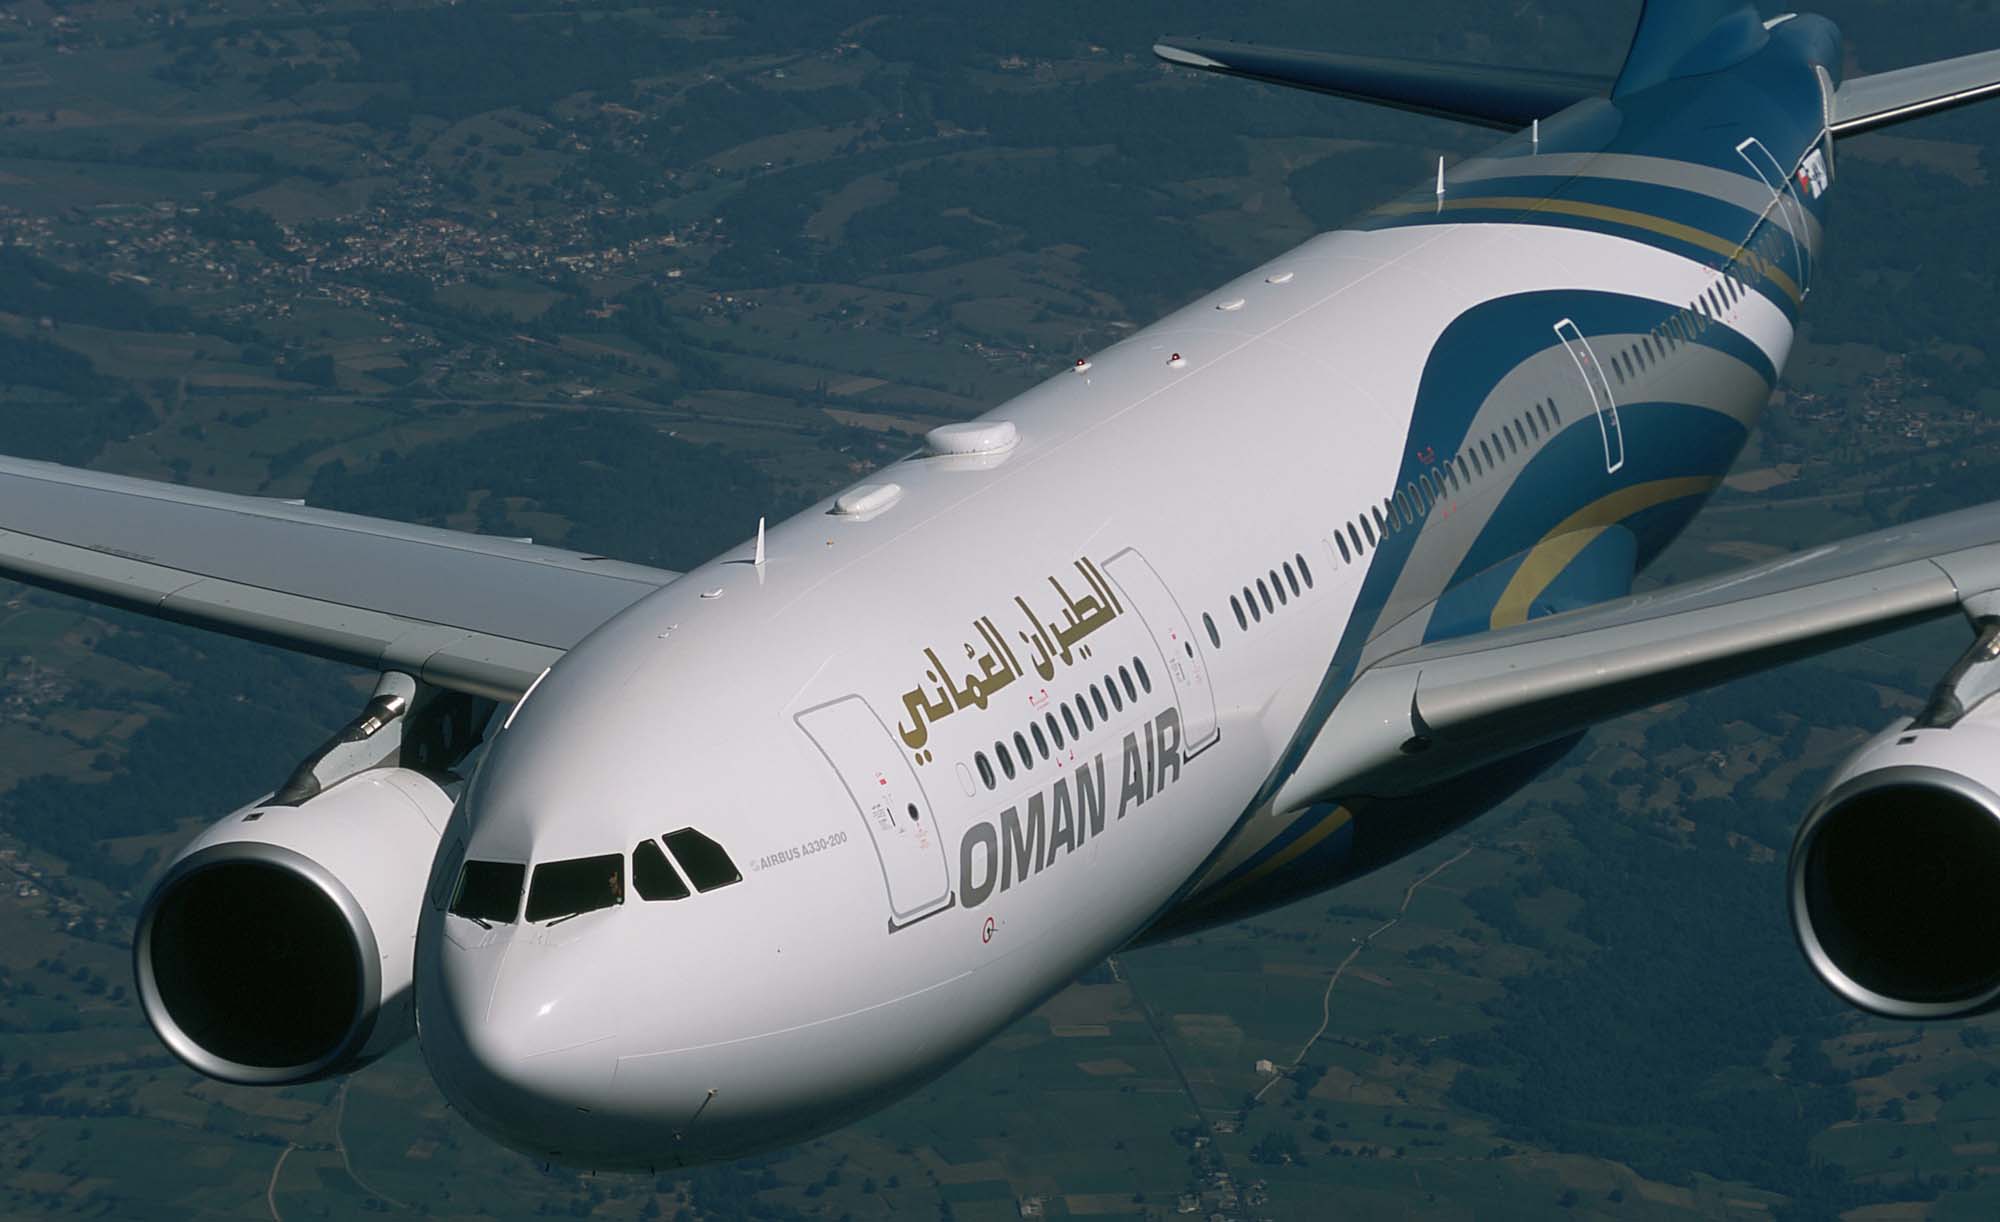 Oman Air chooses SmartKargo air cargo solution to power growth